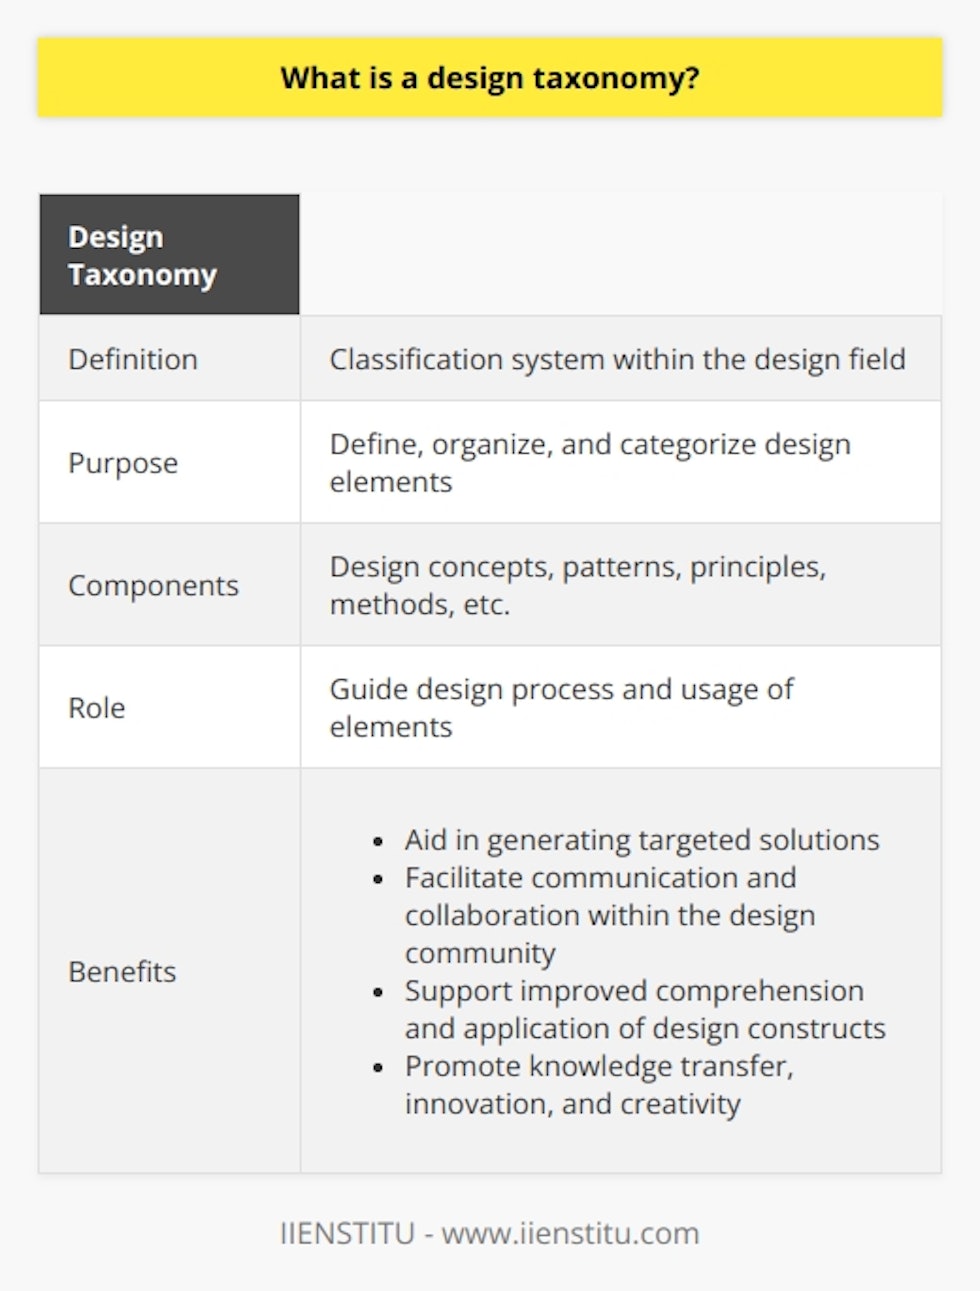 Design taxonomy refers to a classification system within the field of design. It involves defining, organizing, and categorizing various design elements based on their similarities and differences. This taxonomy takes into account design concepts, patterns, principles, methods, and more to provide a structured approach in understanding and utilizing these elements effectively.In design practice, design taxonomy plays a crucial role in guiding the process and usage of design elements. It helps designers generate targeted solutions that are efficient and effective. Furthermore, it facilitates communication within the design community, leading to increased collaboration and improved outcomes.The importance of design taxonomy lies in its ability to support improved comprehension and application of design constructs. With this classification system, designers can easily retrieve relevant information and apply it to their work. Additionally, it promotes the transfer of knowledge within the design field, fostering innovation and creativity.In conclusion, design taxonomy shapes the scope and direction of design practices. It provides a structured method for understanding, interpreting, and applying design elements effectively. Because of its strategic importance, design taxonomy benefits both practitioners and learners in the design field.